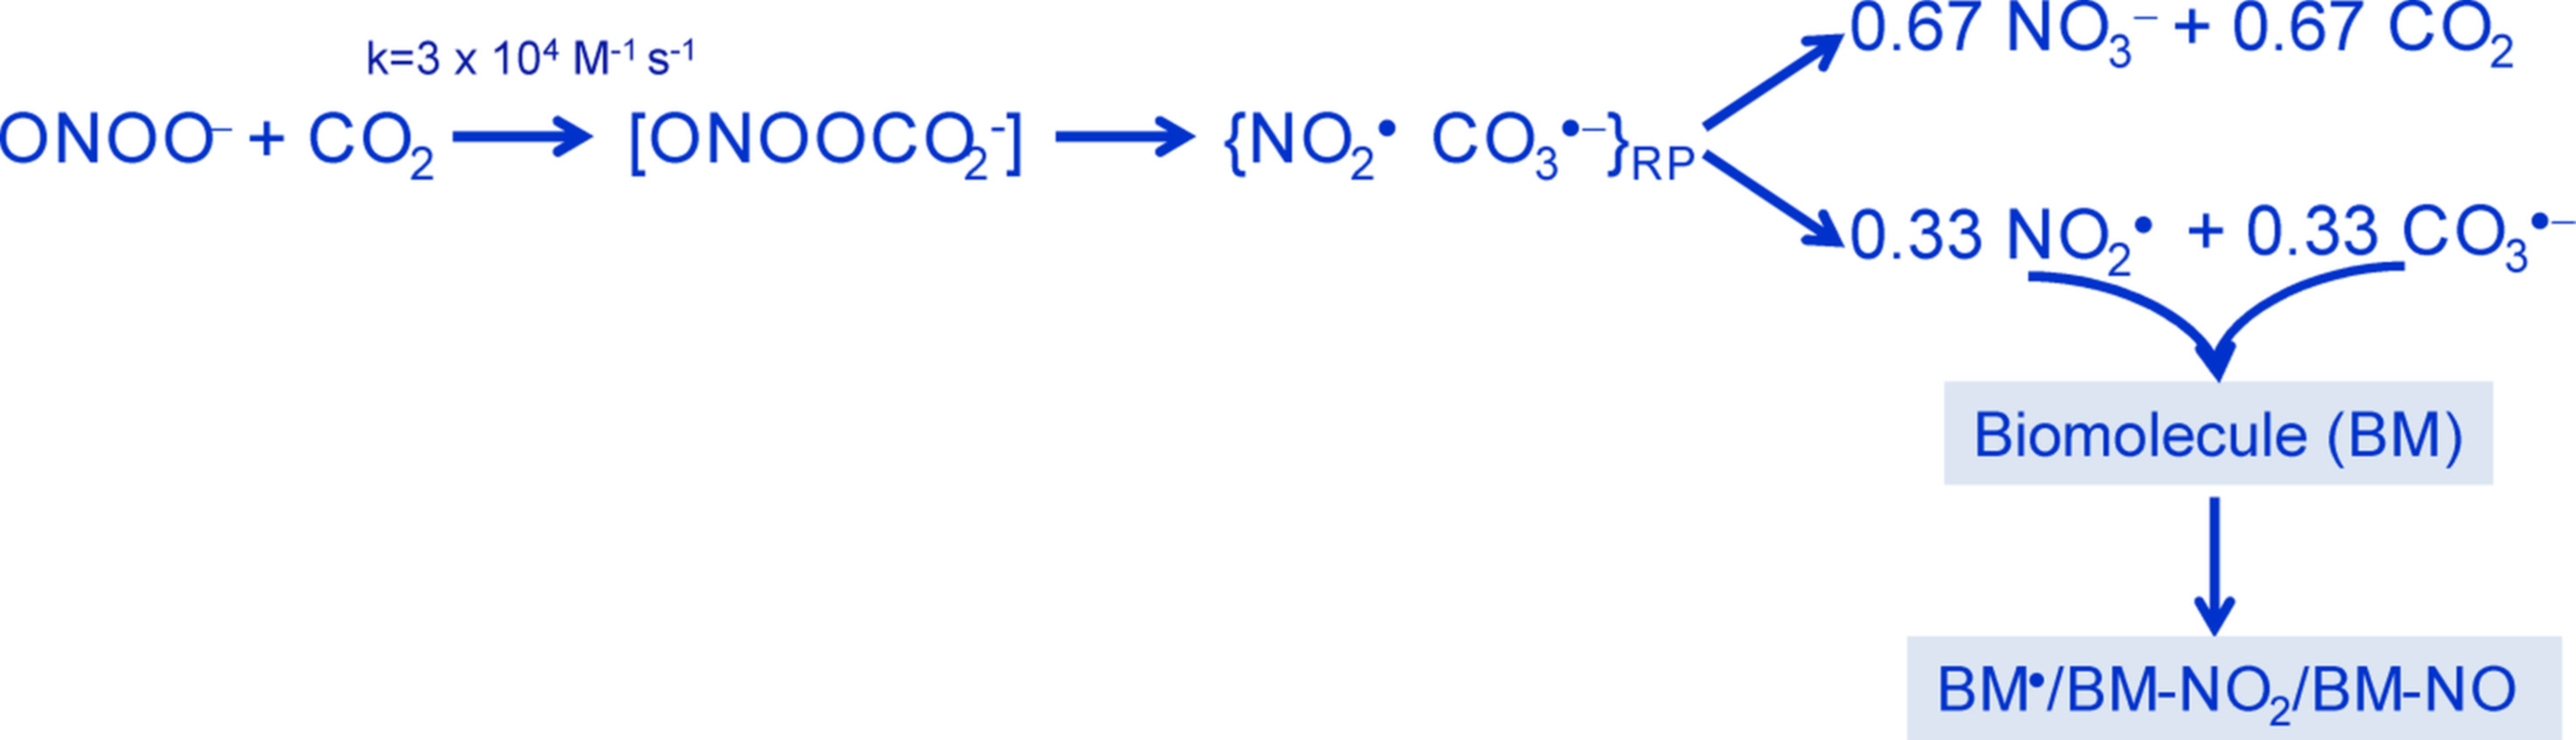 Schematic reaction of peroxynitrite and carbon dioxide